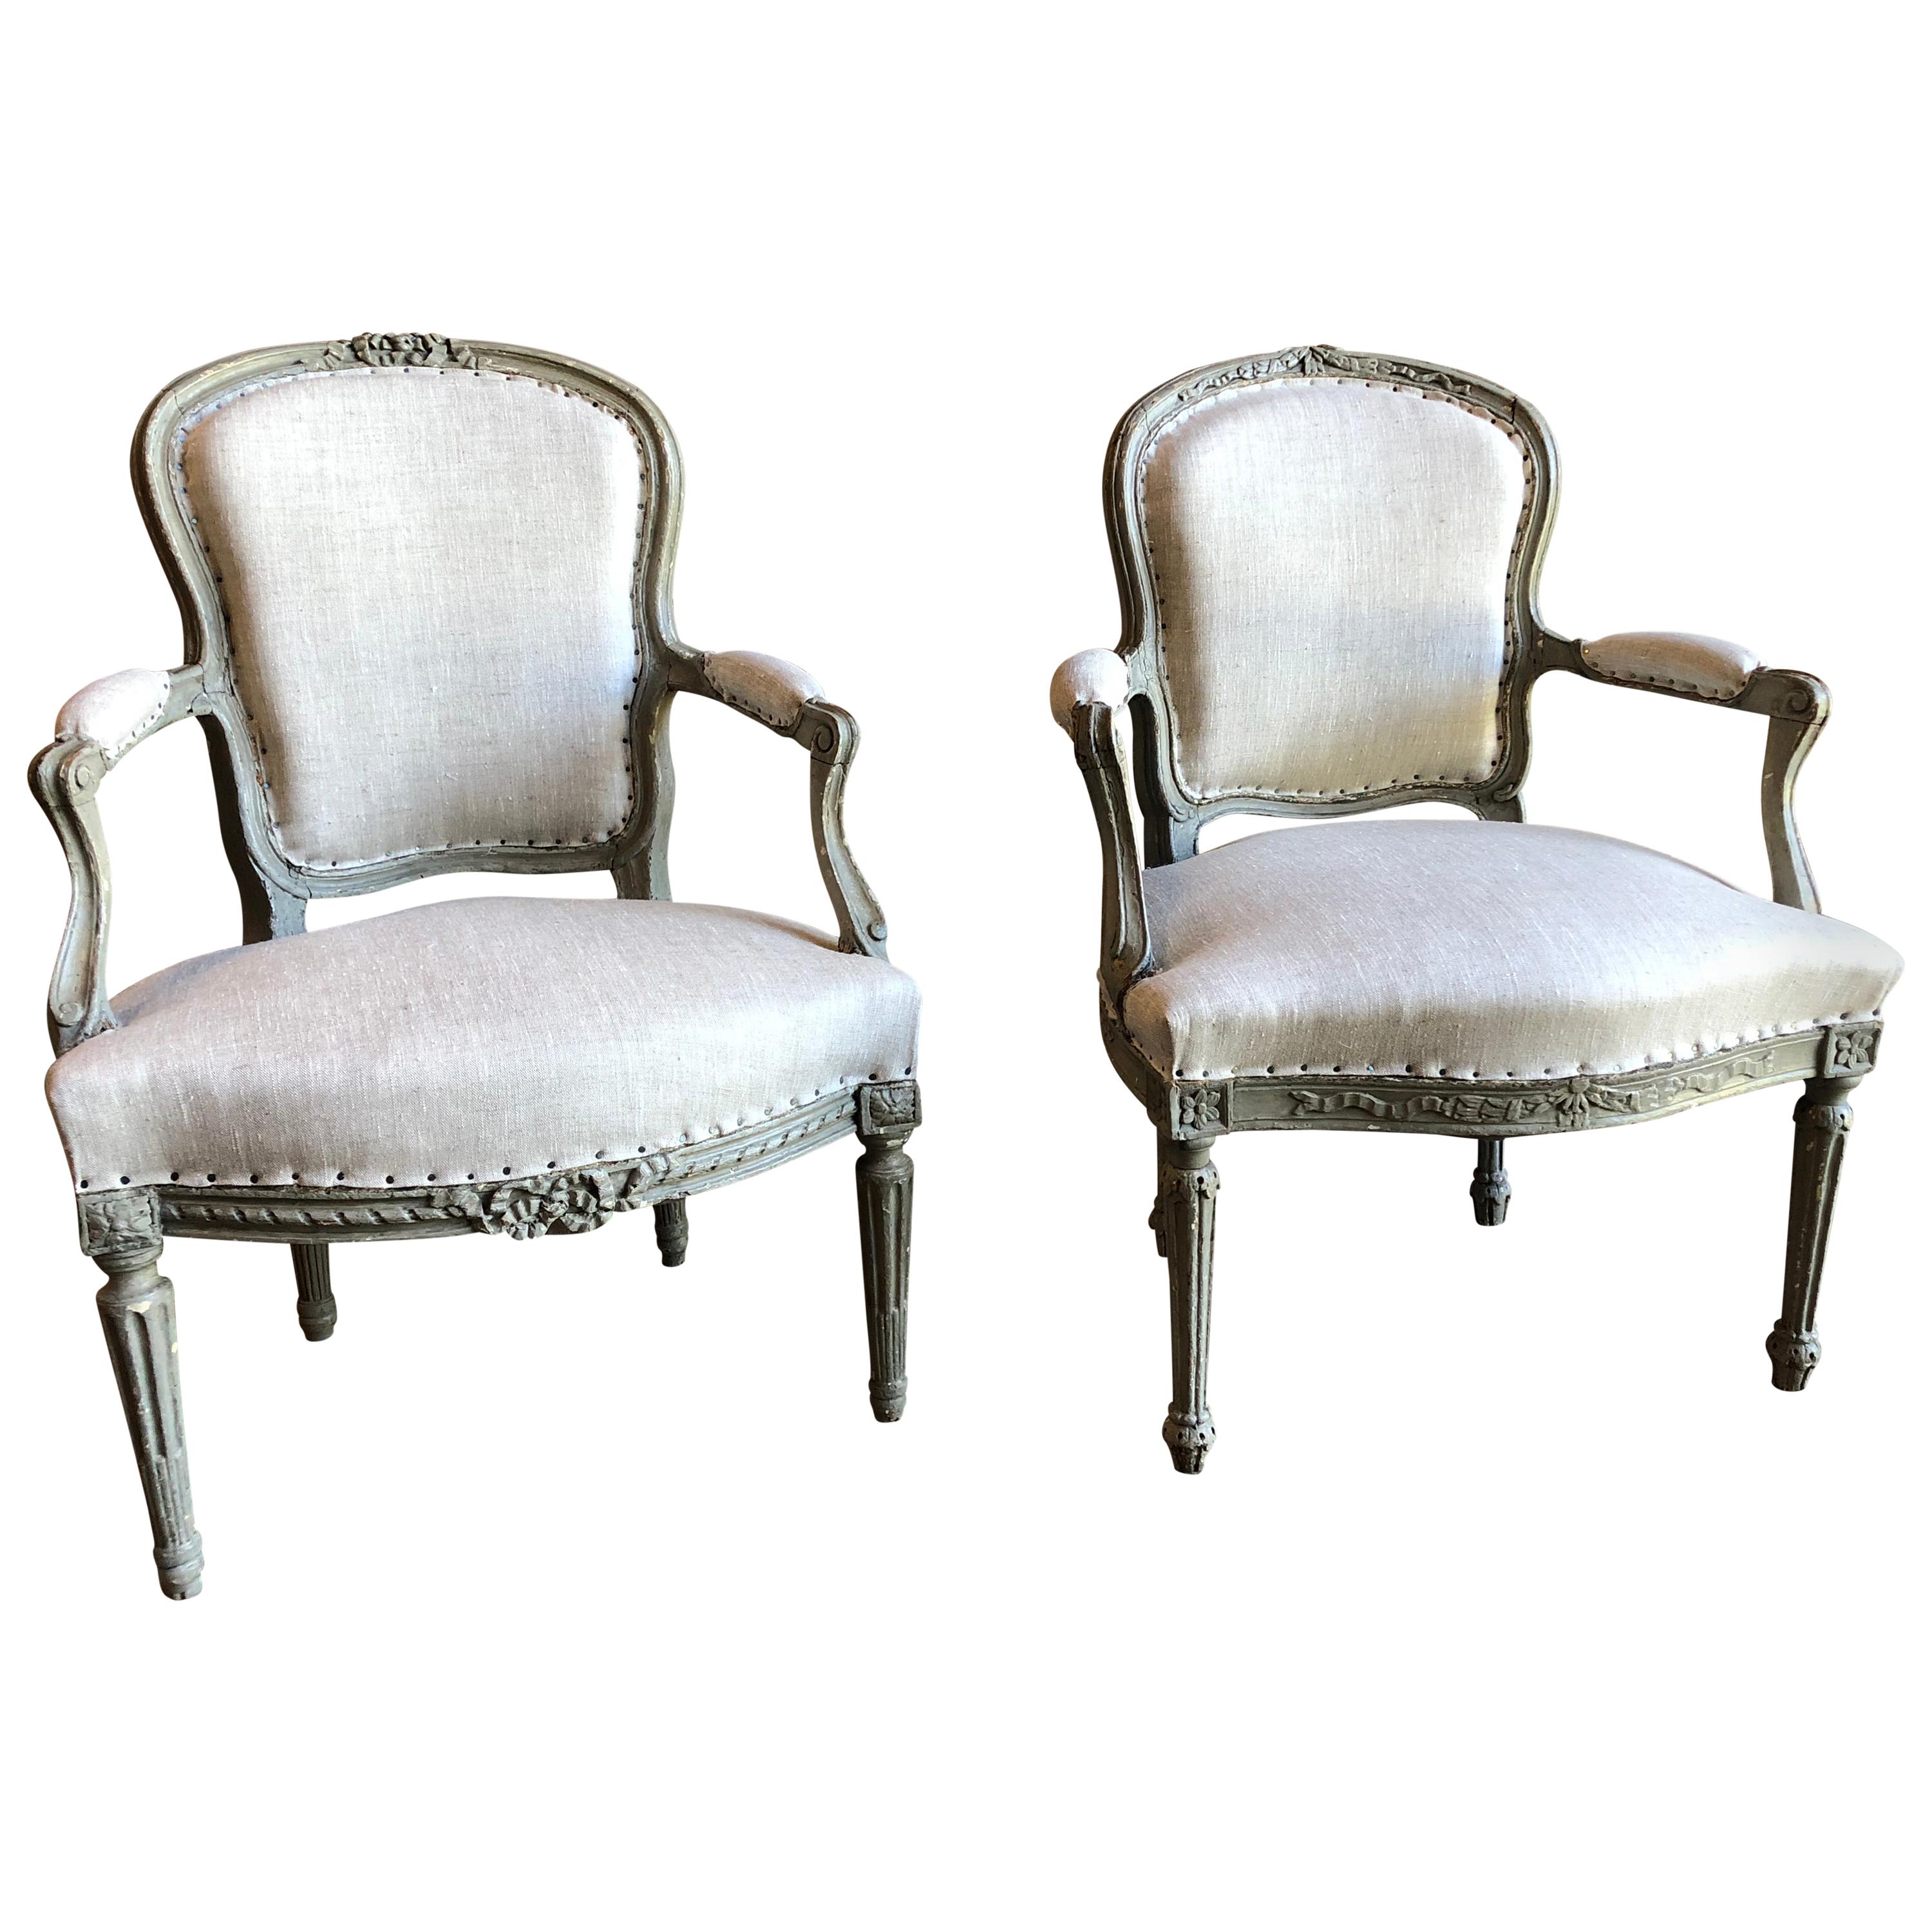 Matched Pair of Louis XVI Armchairs, 1780s